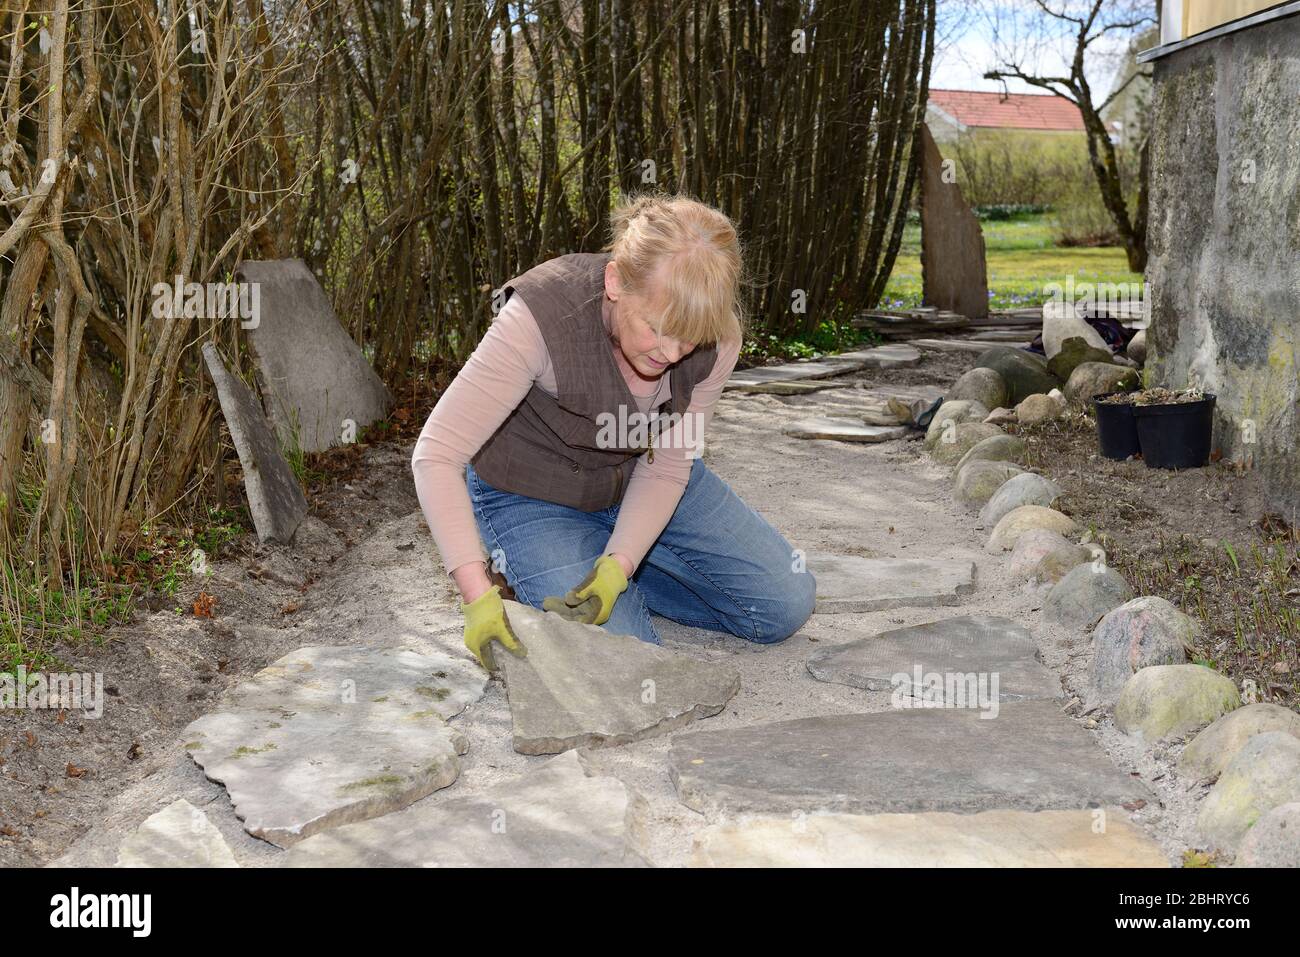 A woman working with flagstones in a domestic garden, Vingåker, Södermanland, Sweden Stock Photo